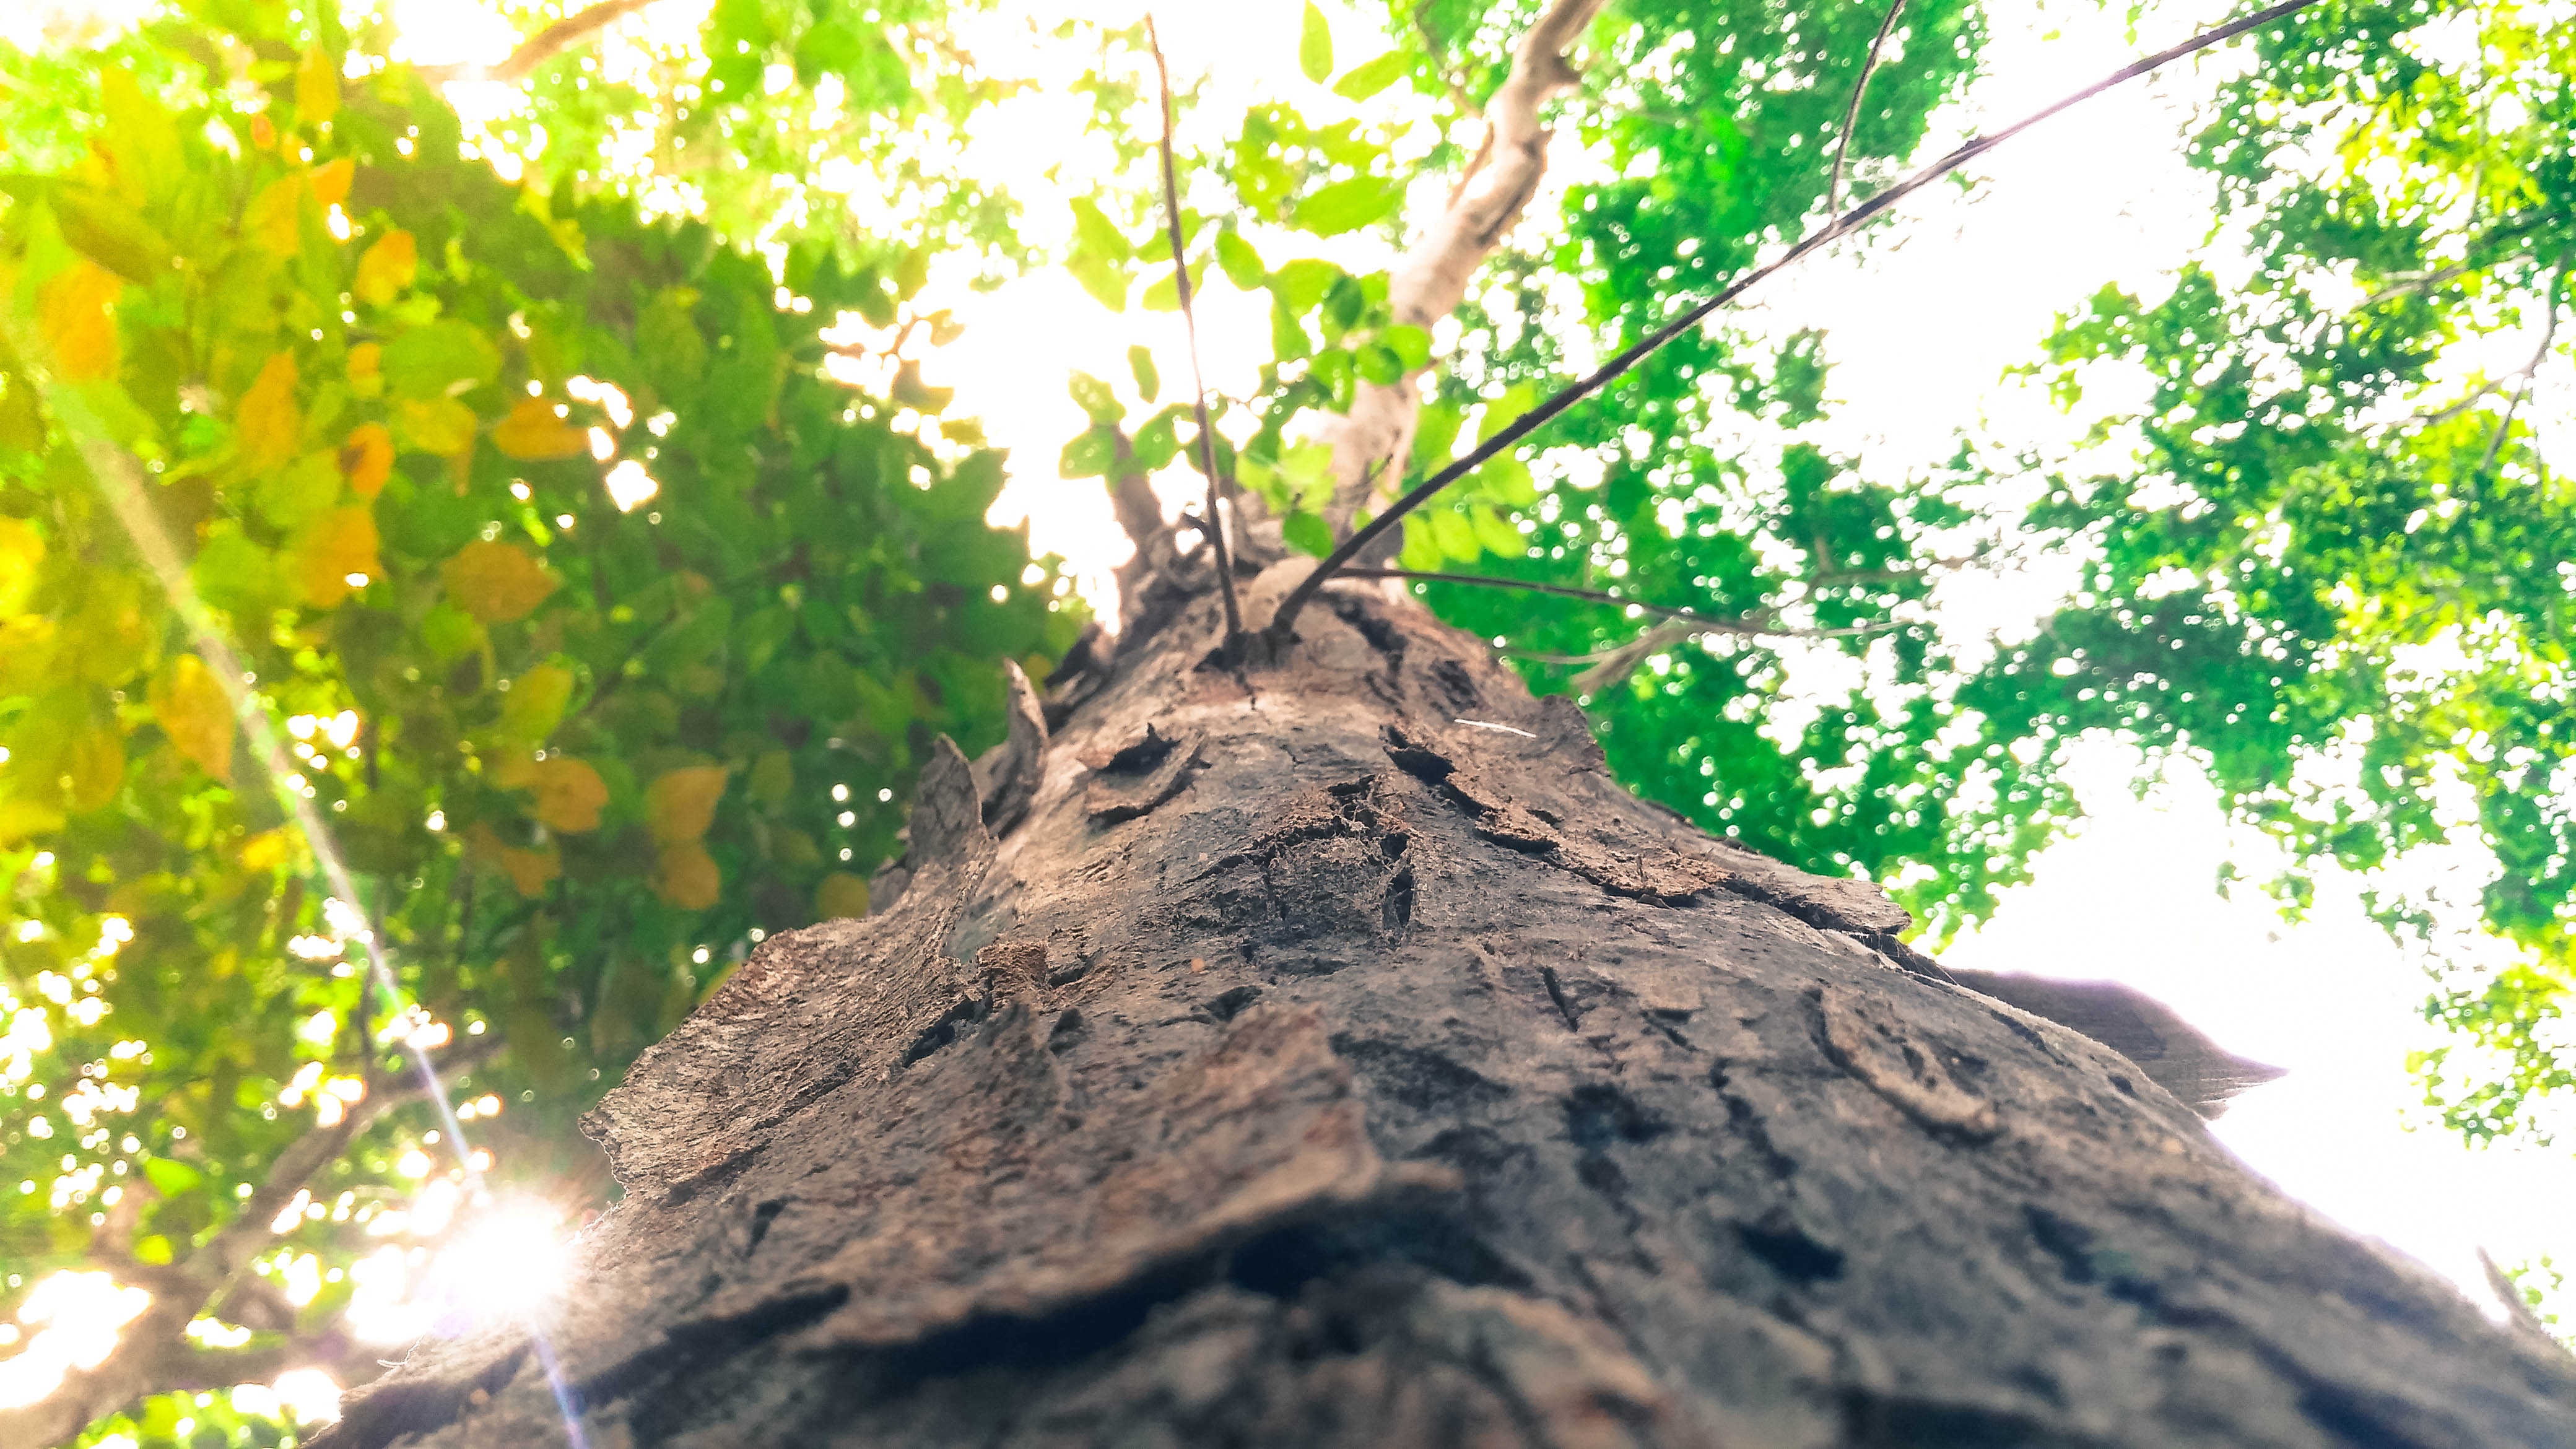 worm's eye view photography of green leaved tree during daytime